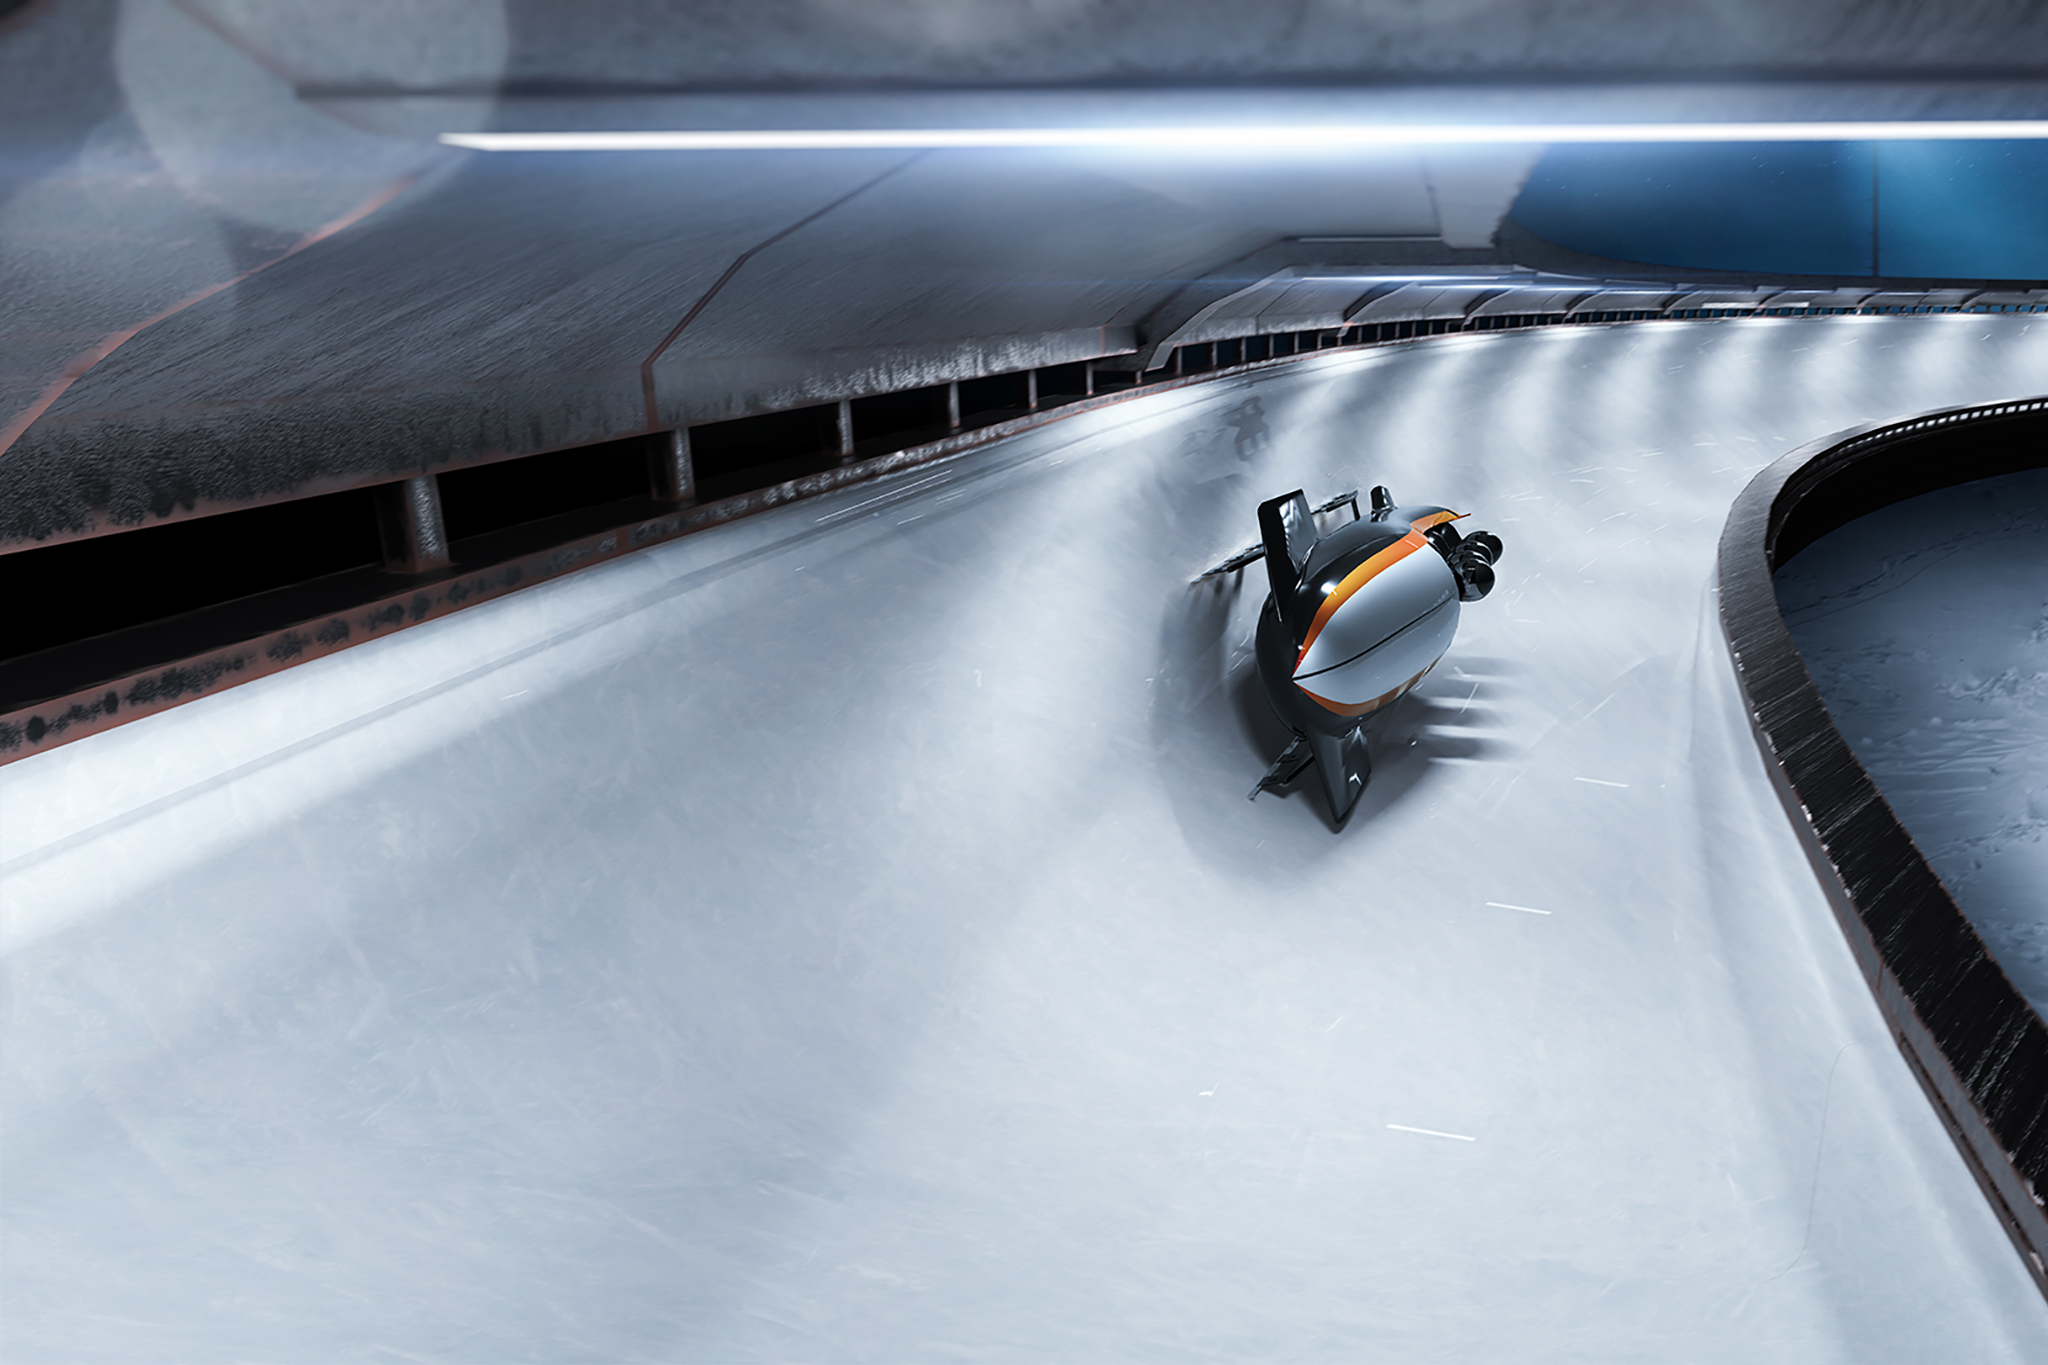 Stock image of bobsled track. SDS2 customers KMA Steel detailed two olympic-sized projects at Lake Placid, NY. 